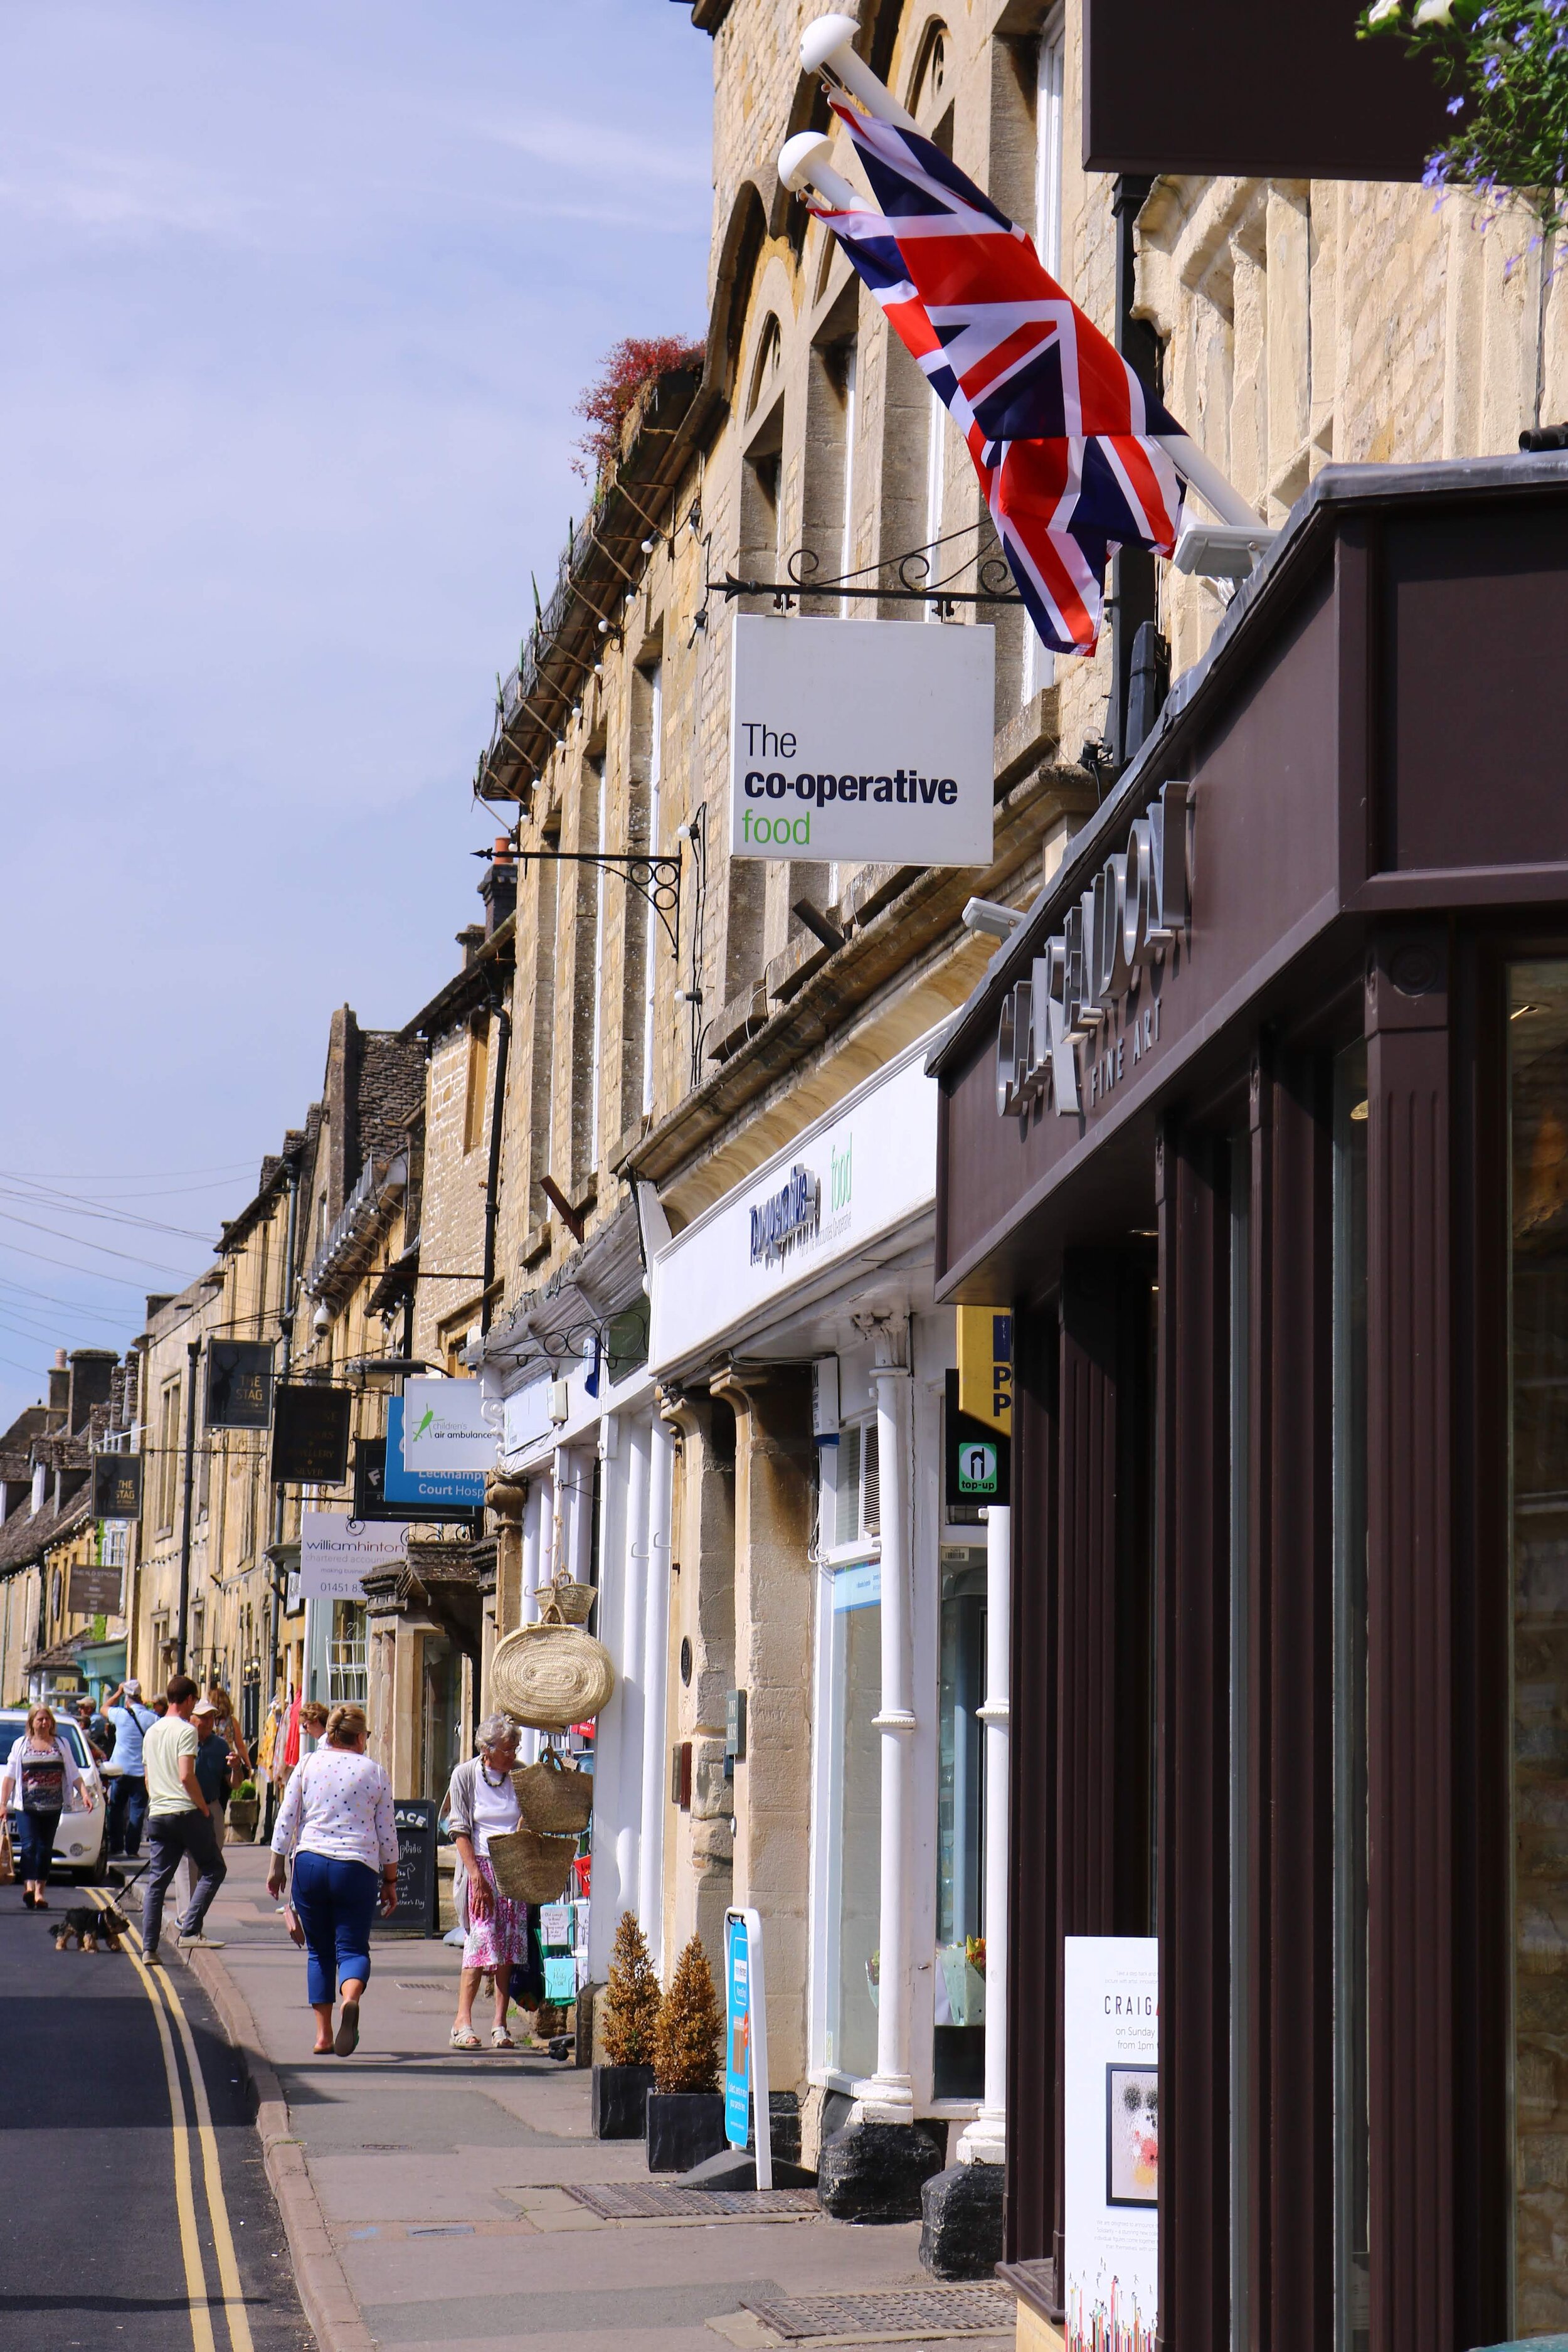 A busy high street in one of the best towns in the Cotswolds to visit - Chipping Campden